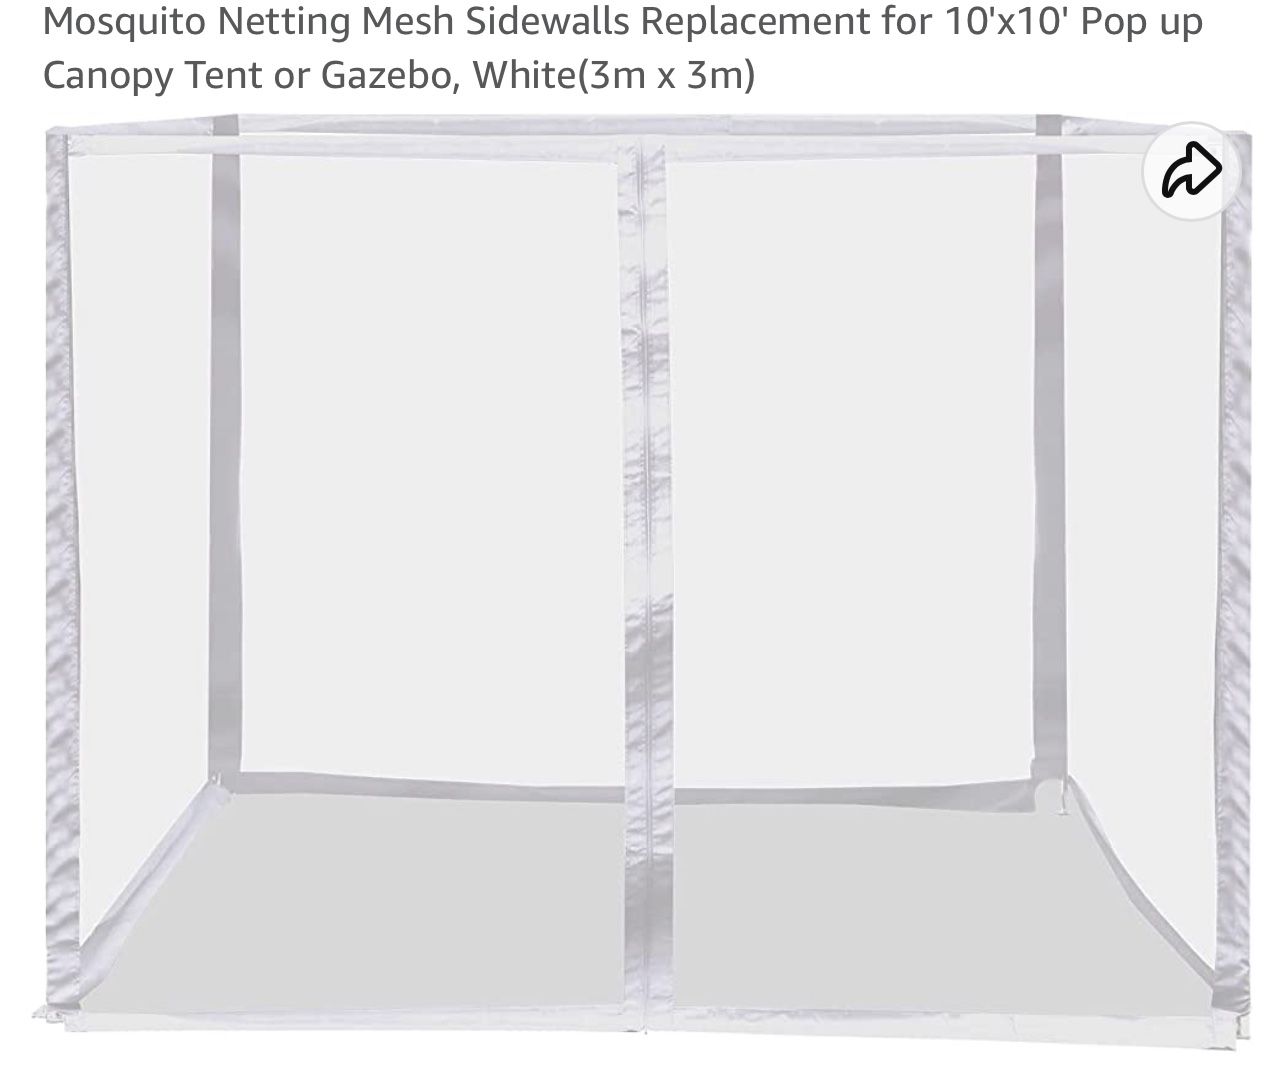 Mosquito Netting Mesh Sidewalls Replacement for 10'x10' Pop up Canopy Tent or Gazebo